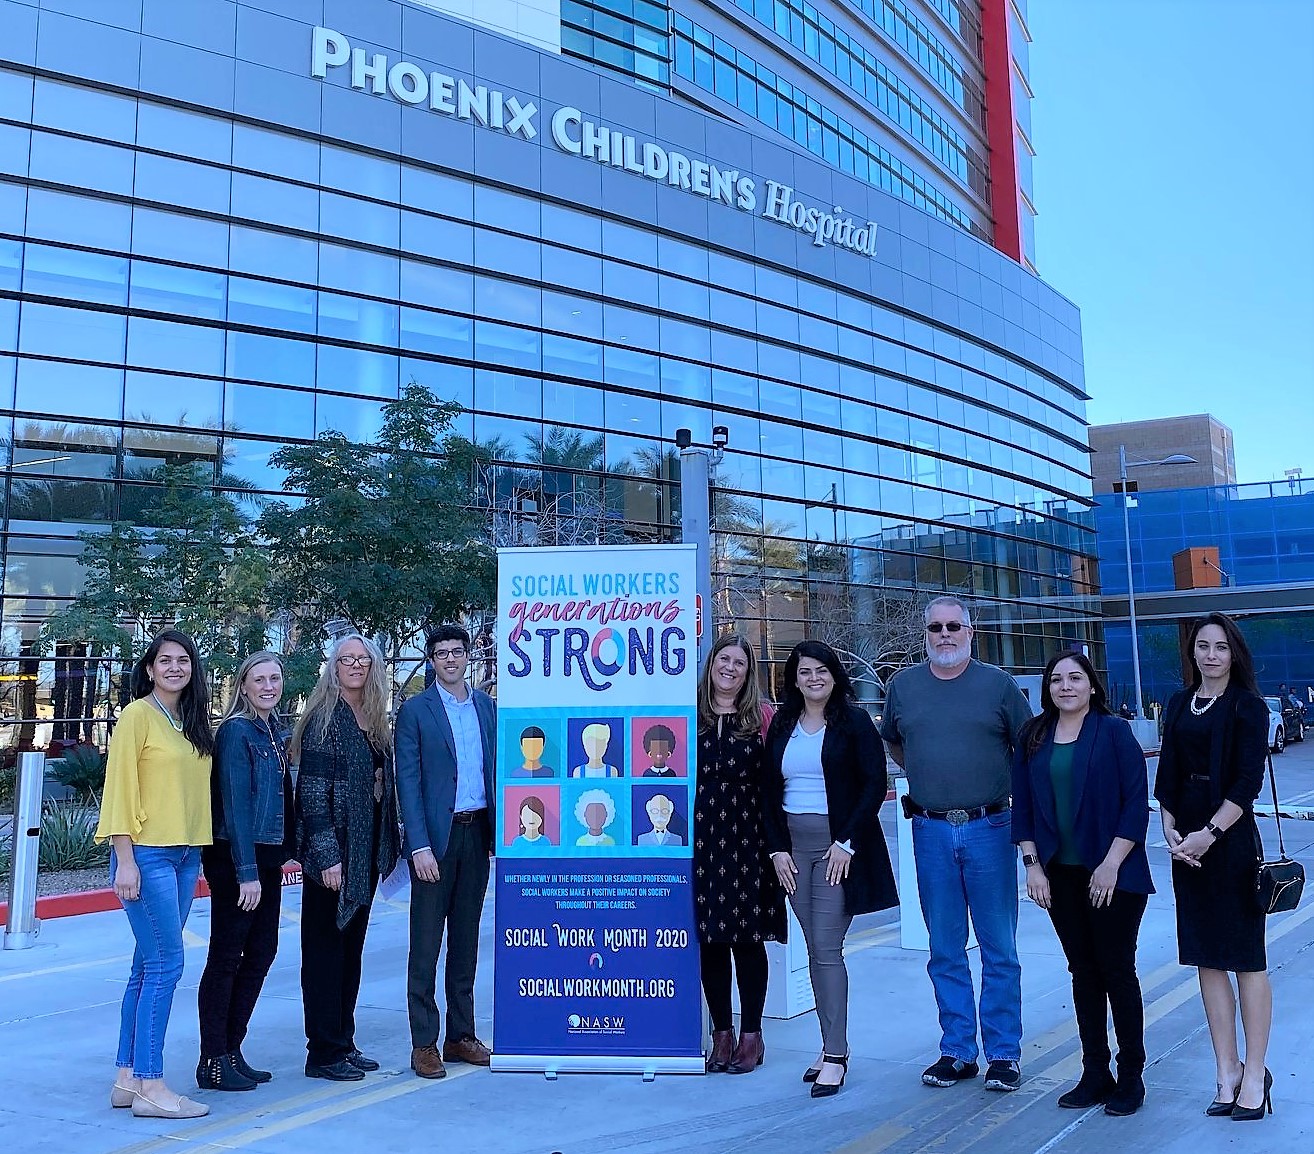 Social workers standing in front of Phoenix Children's Hospital for Social Work Month 2020